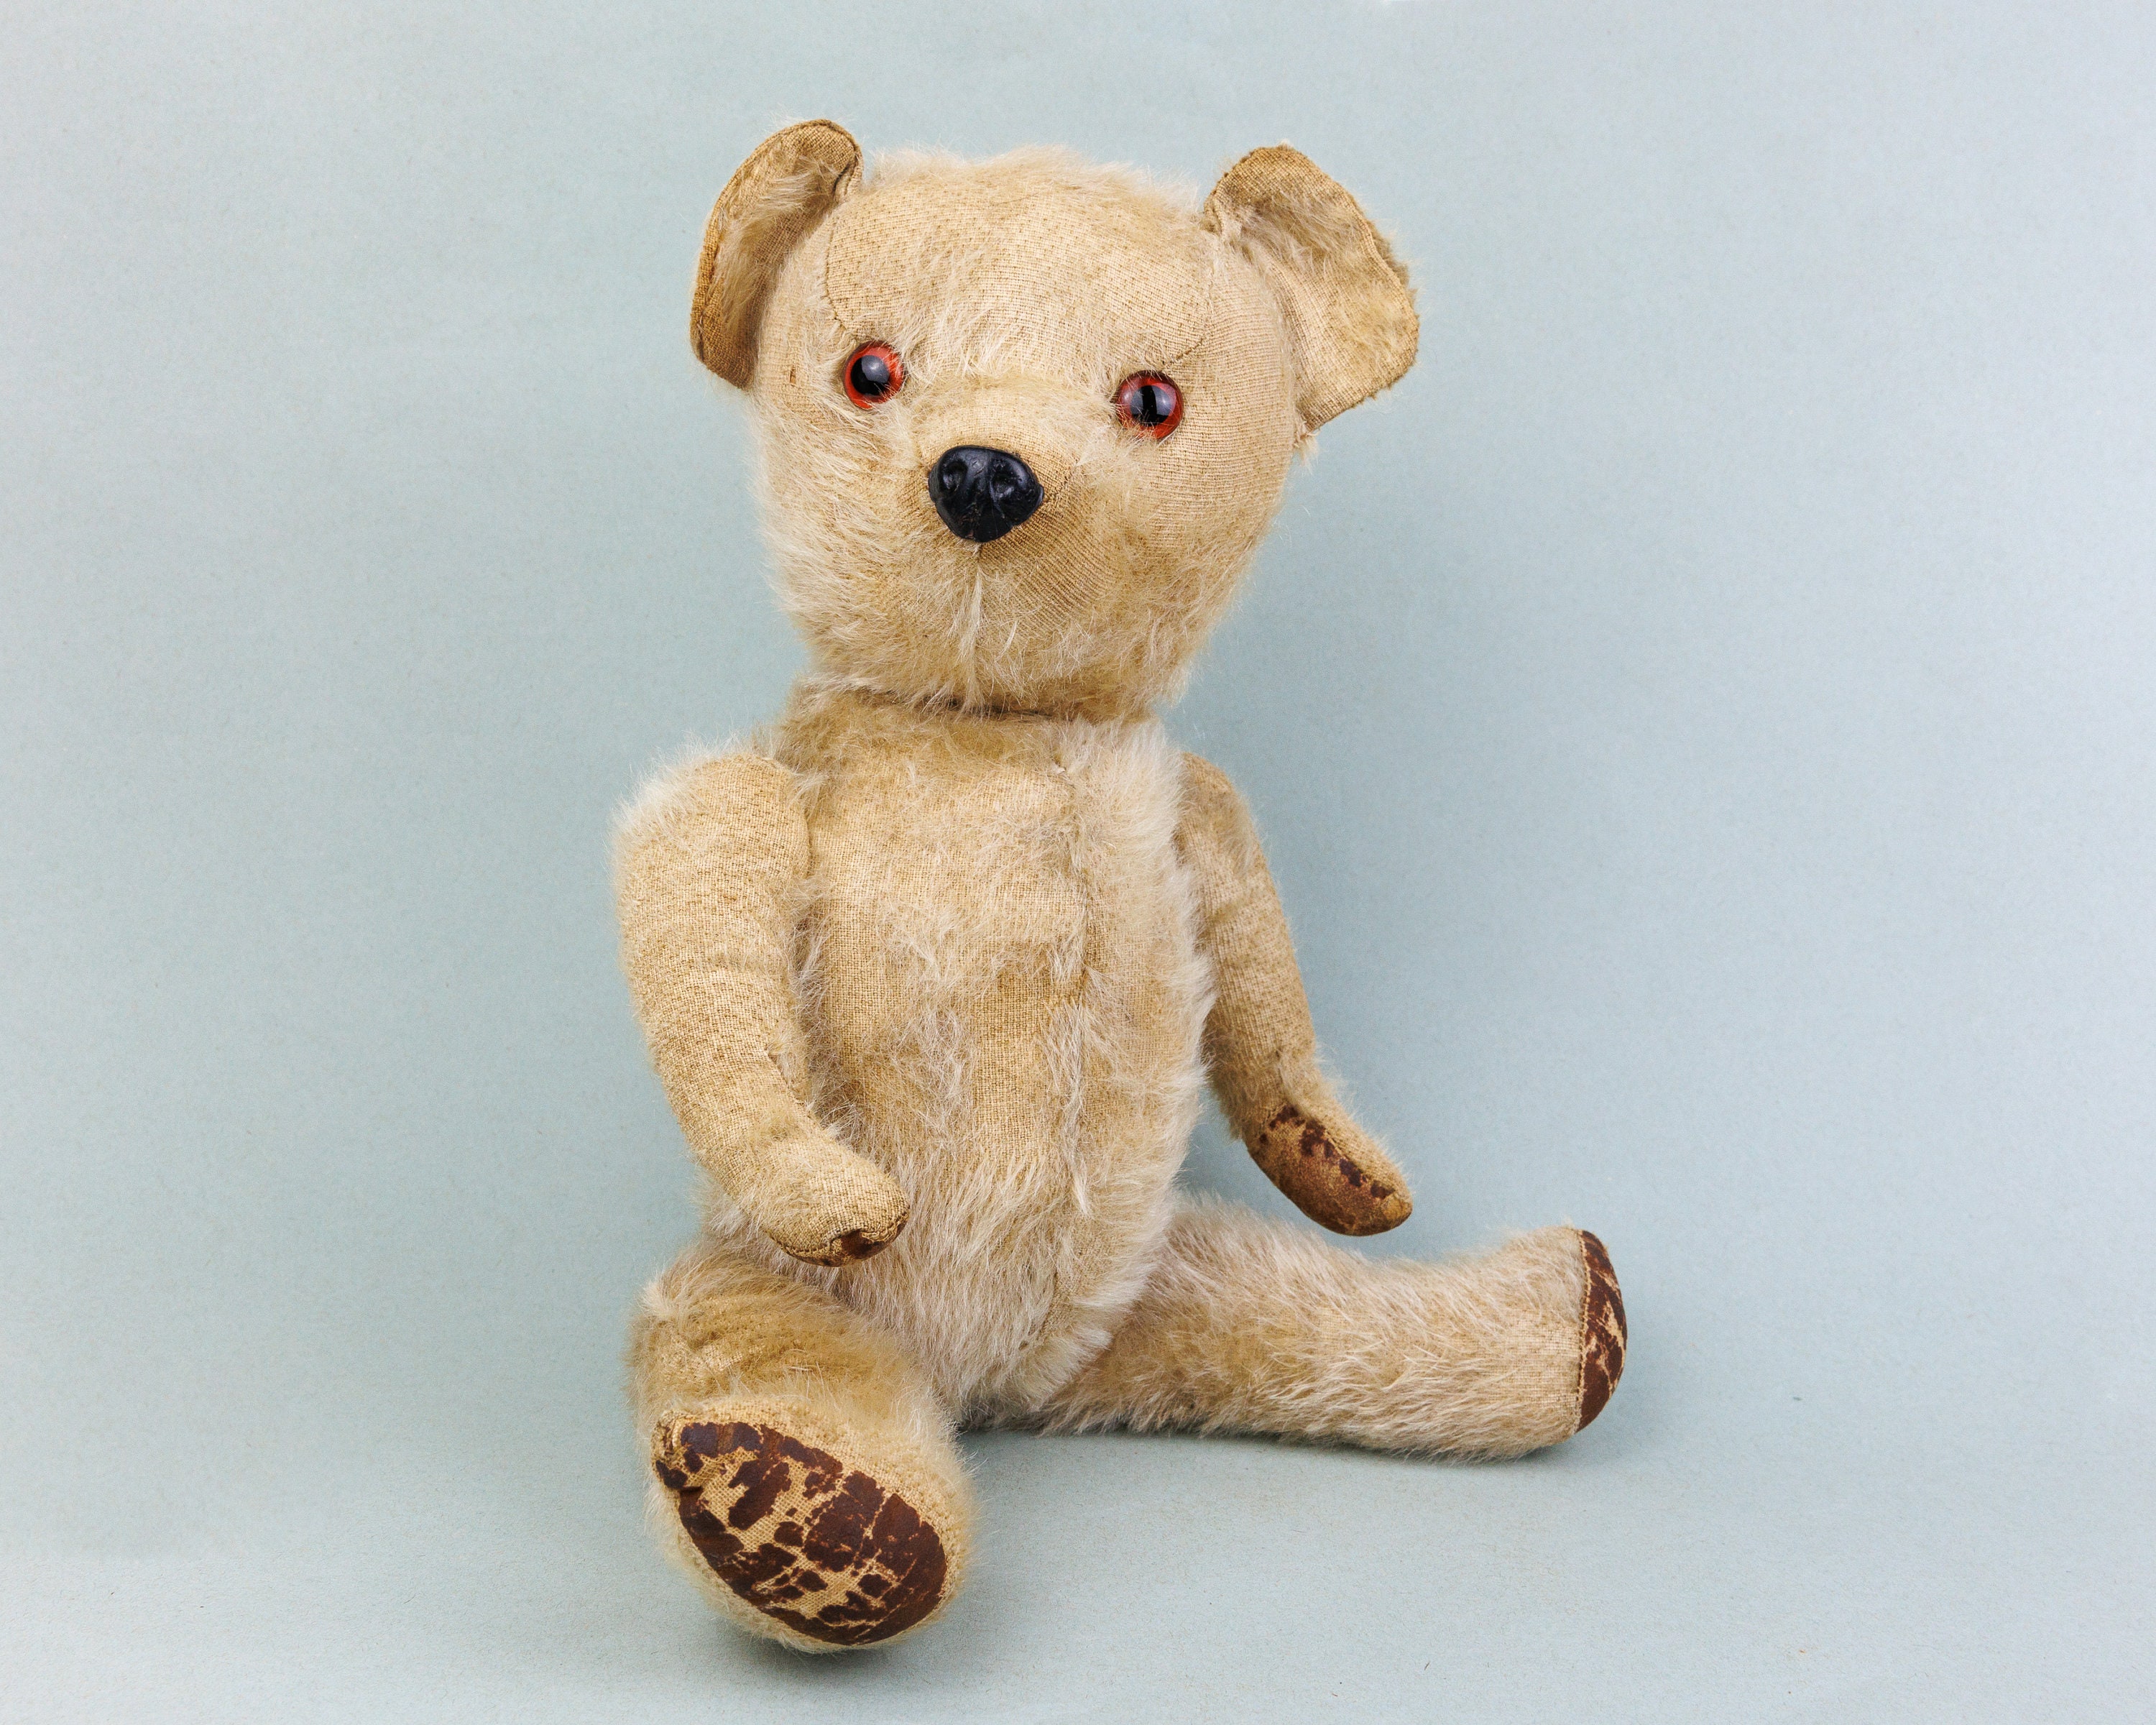 Trucraft - Large Set - Brown Safety Eyes and Nose for Teddy Bears